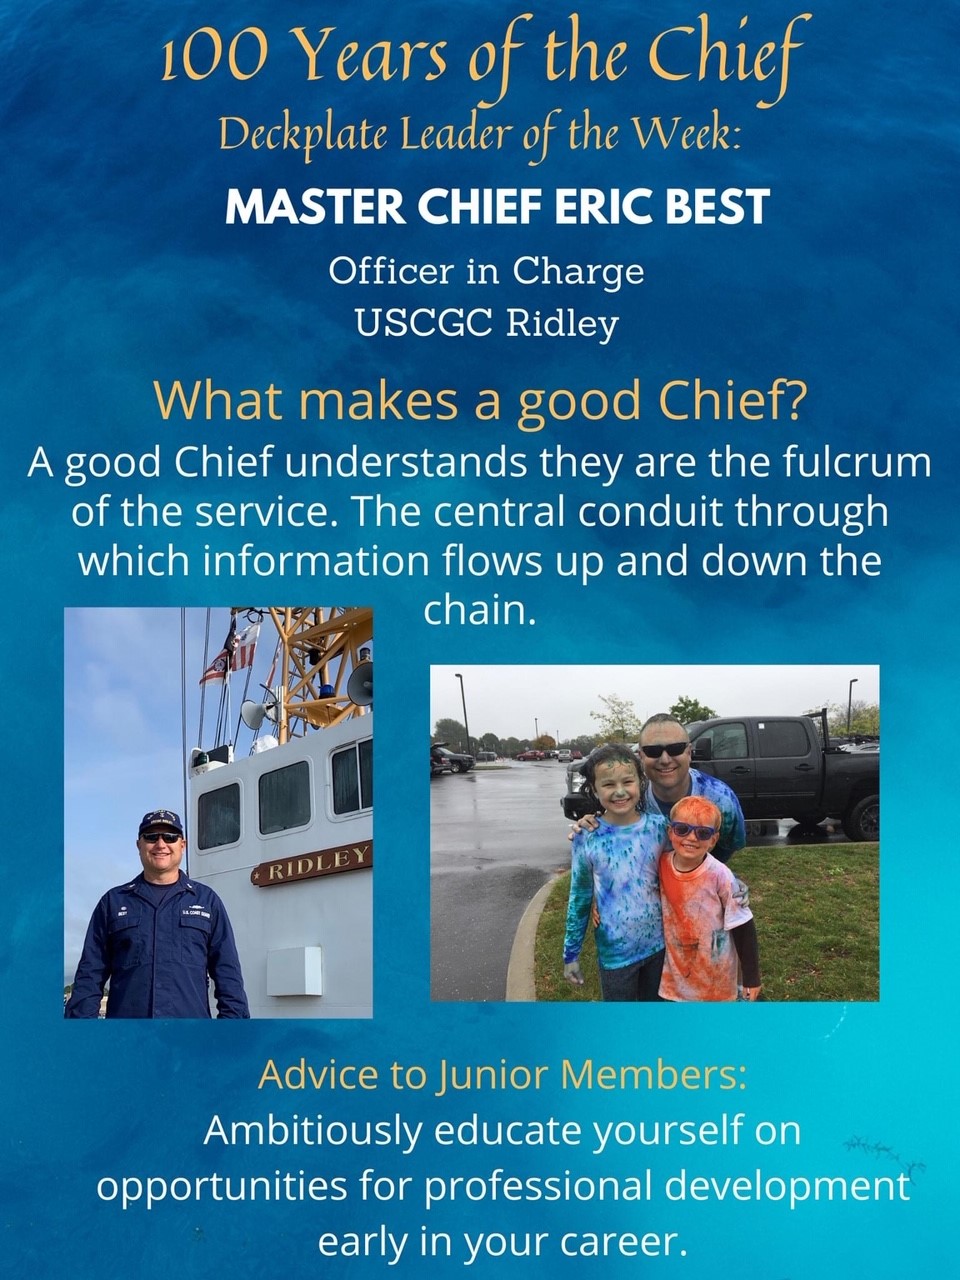 Chief of the Week: Chief Petty Officer Eric Best: "My advice to junior members is to ambitiously educate yourself on opportunities for professional development early in your career. There is such a broad range of career tracks and educational opportunities, but our junior ranks experience gaps in information. To best position yourself for charting your career, seek guidance from Chiefs and Officers. Ask them the why, how, and when they made their choices and what they would change if they could go back. Read the message board to see solicitations for special educational programs. Go to the Coast Guard Educational and Training Quota Management Command (ETQC) portal site and read everything. Making the most informed decision will maximize your chances for job satisfaction and overall success."